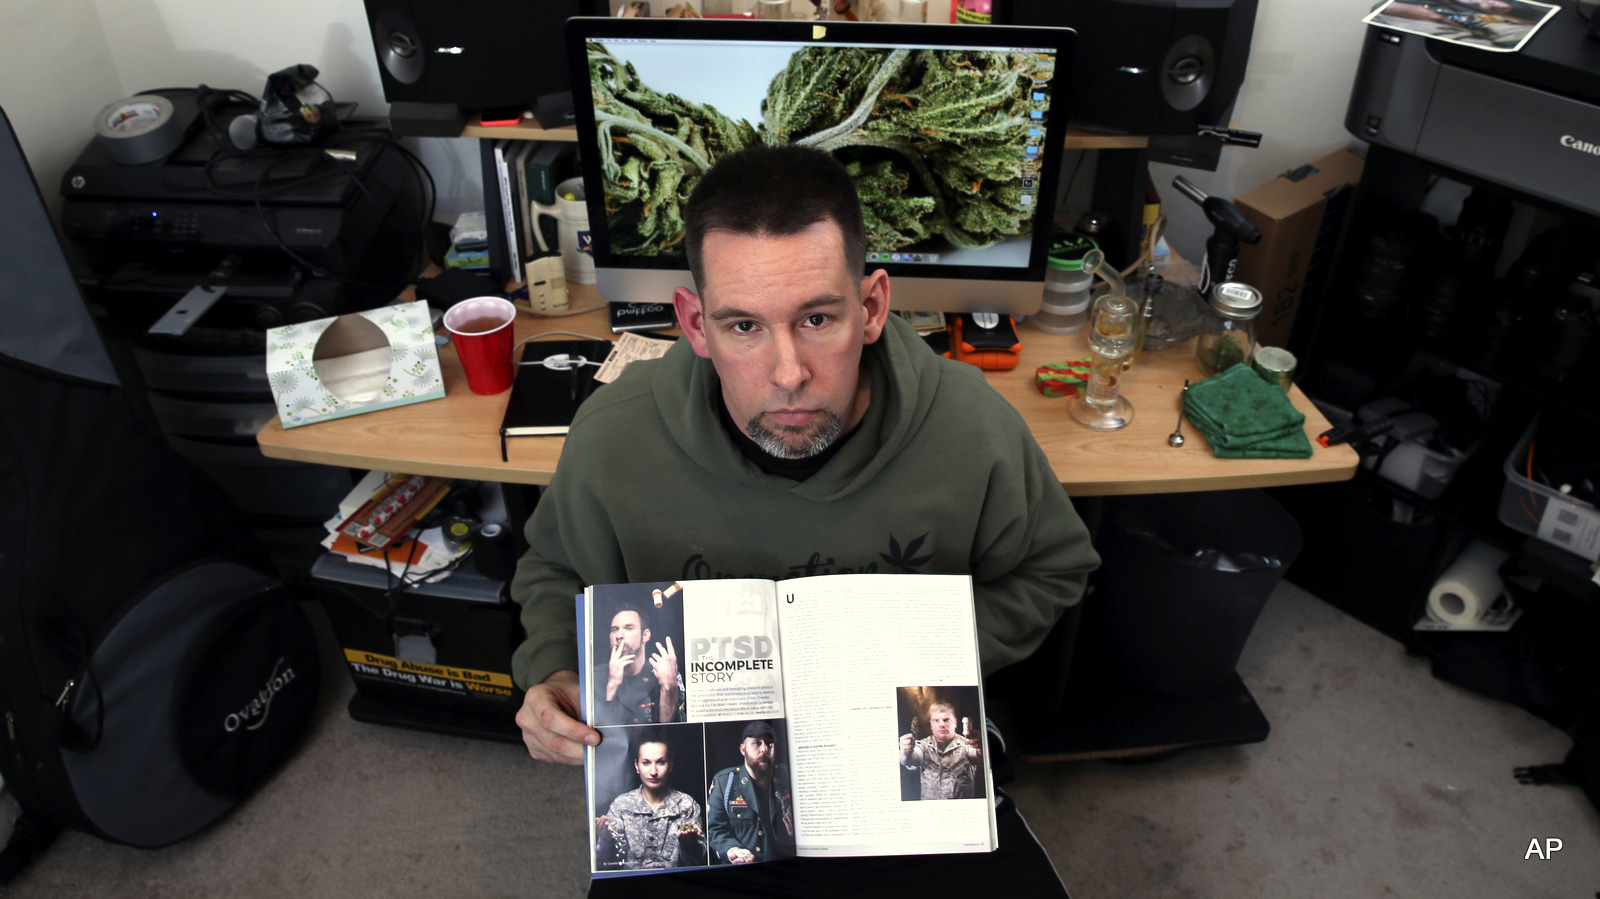 Former U.S. Marine Mike Whiter, who uses marijuana to treat post-traumatic stress disorder, displays some of his photographs of military personnel published in a magazine, as he sits at a desk in his home in Philadelphia. A growing number of states are weighing whether to legalize marijuana to treat PTSD.